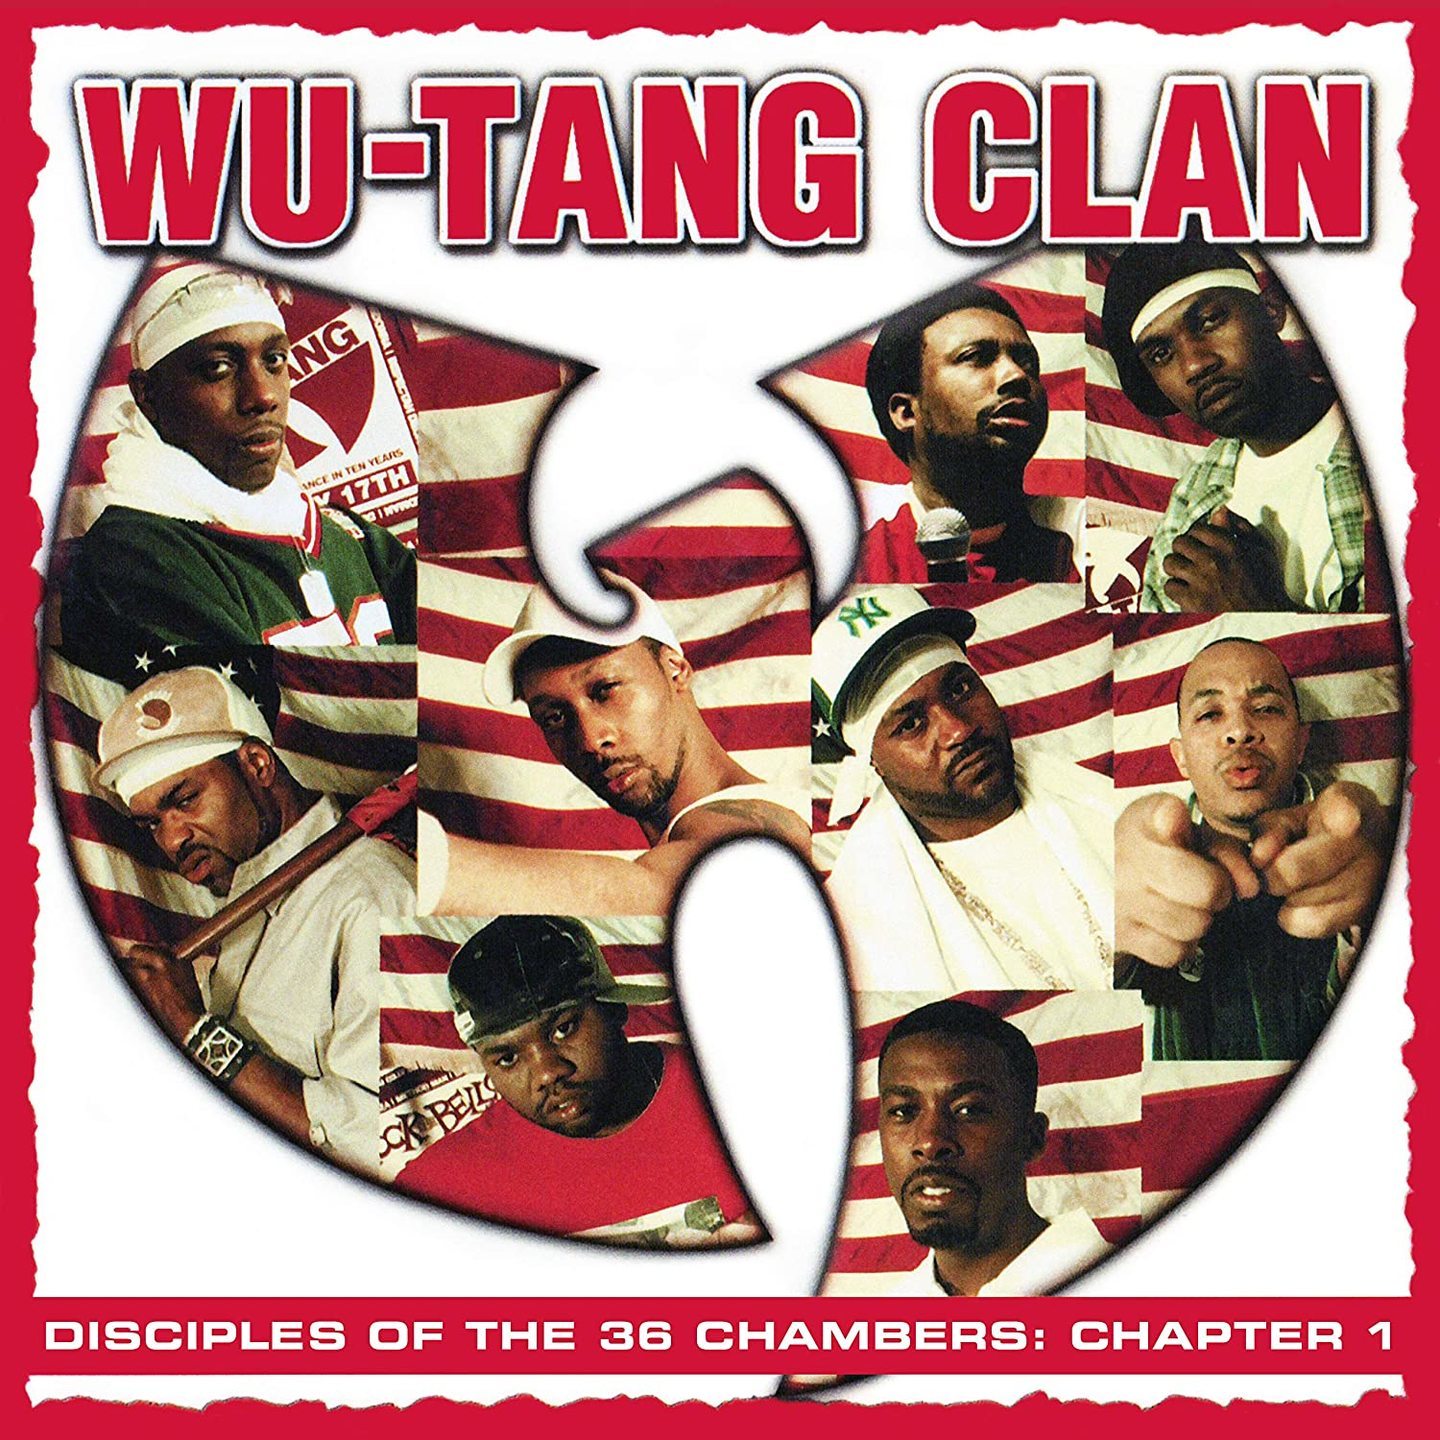 WU-TANG CLAN - Disciples Of The 36 Chambers Chapter 1 2xLP